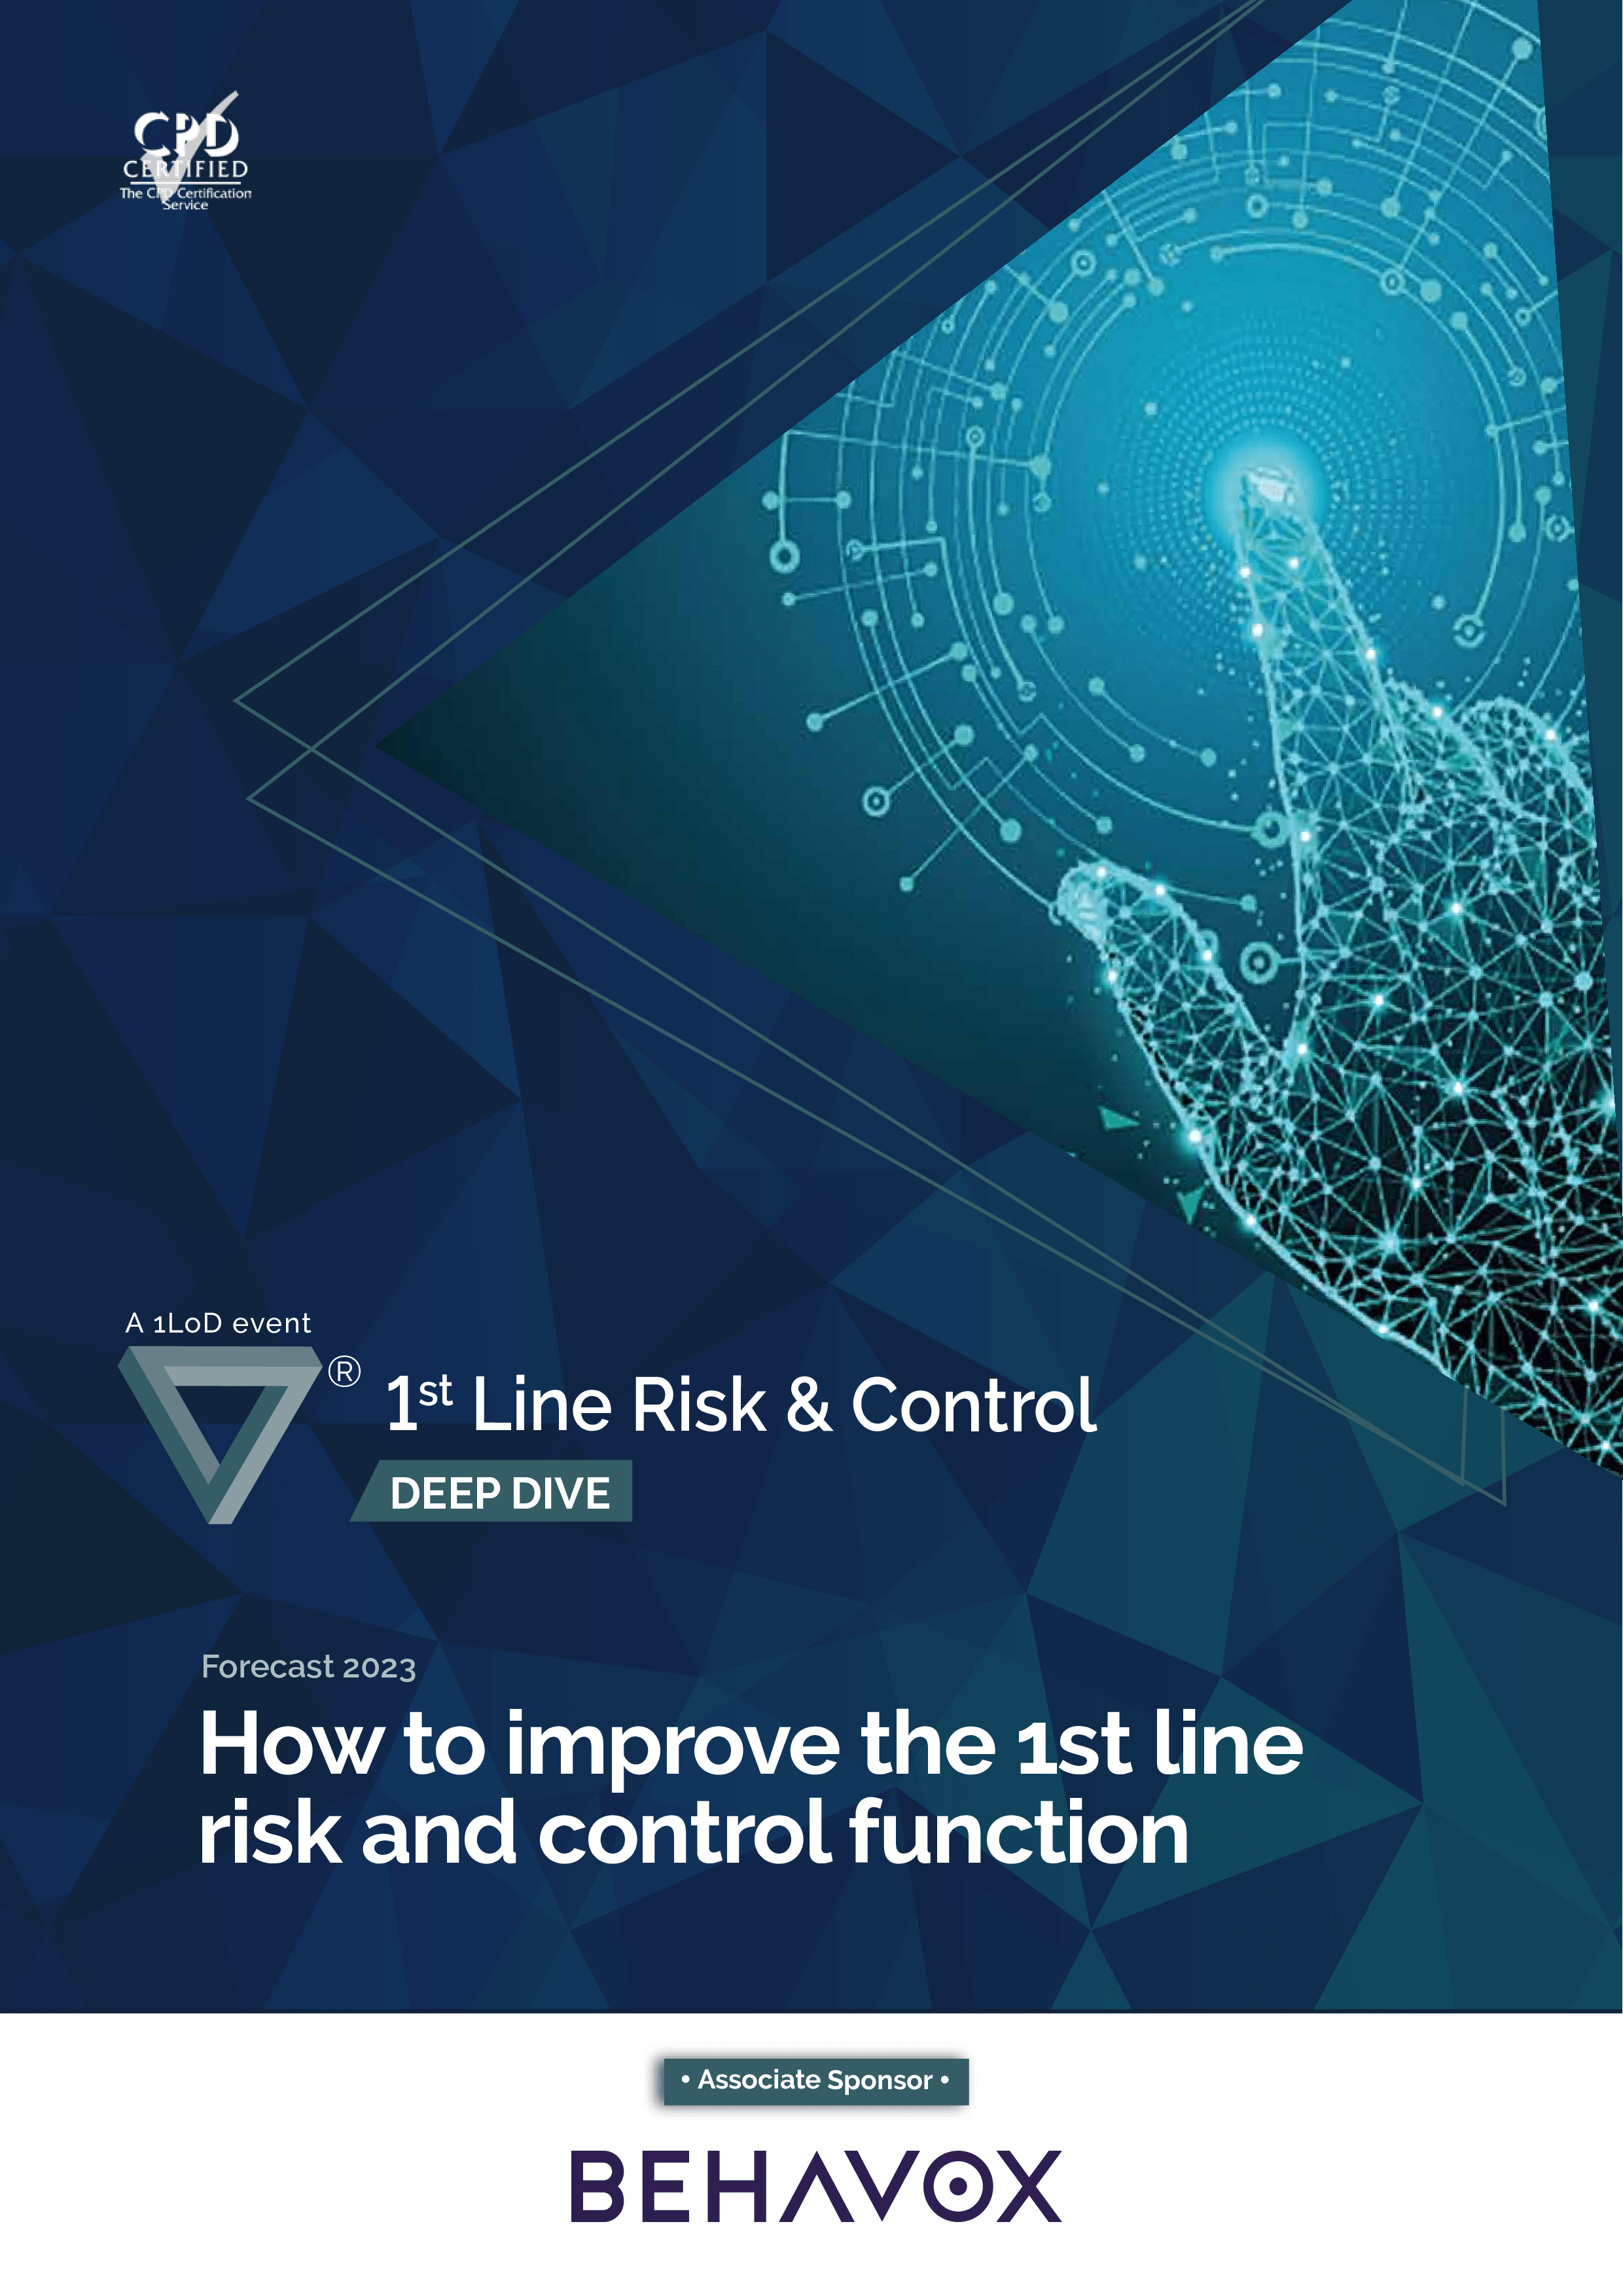 How to improve the 1st line risk and control function